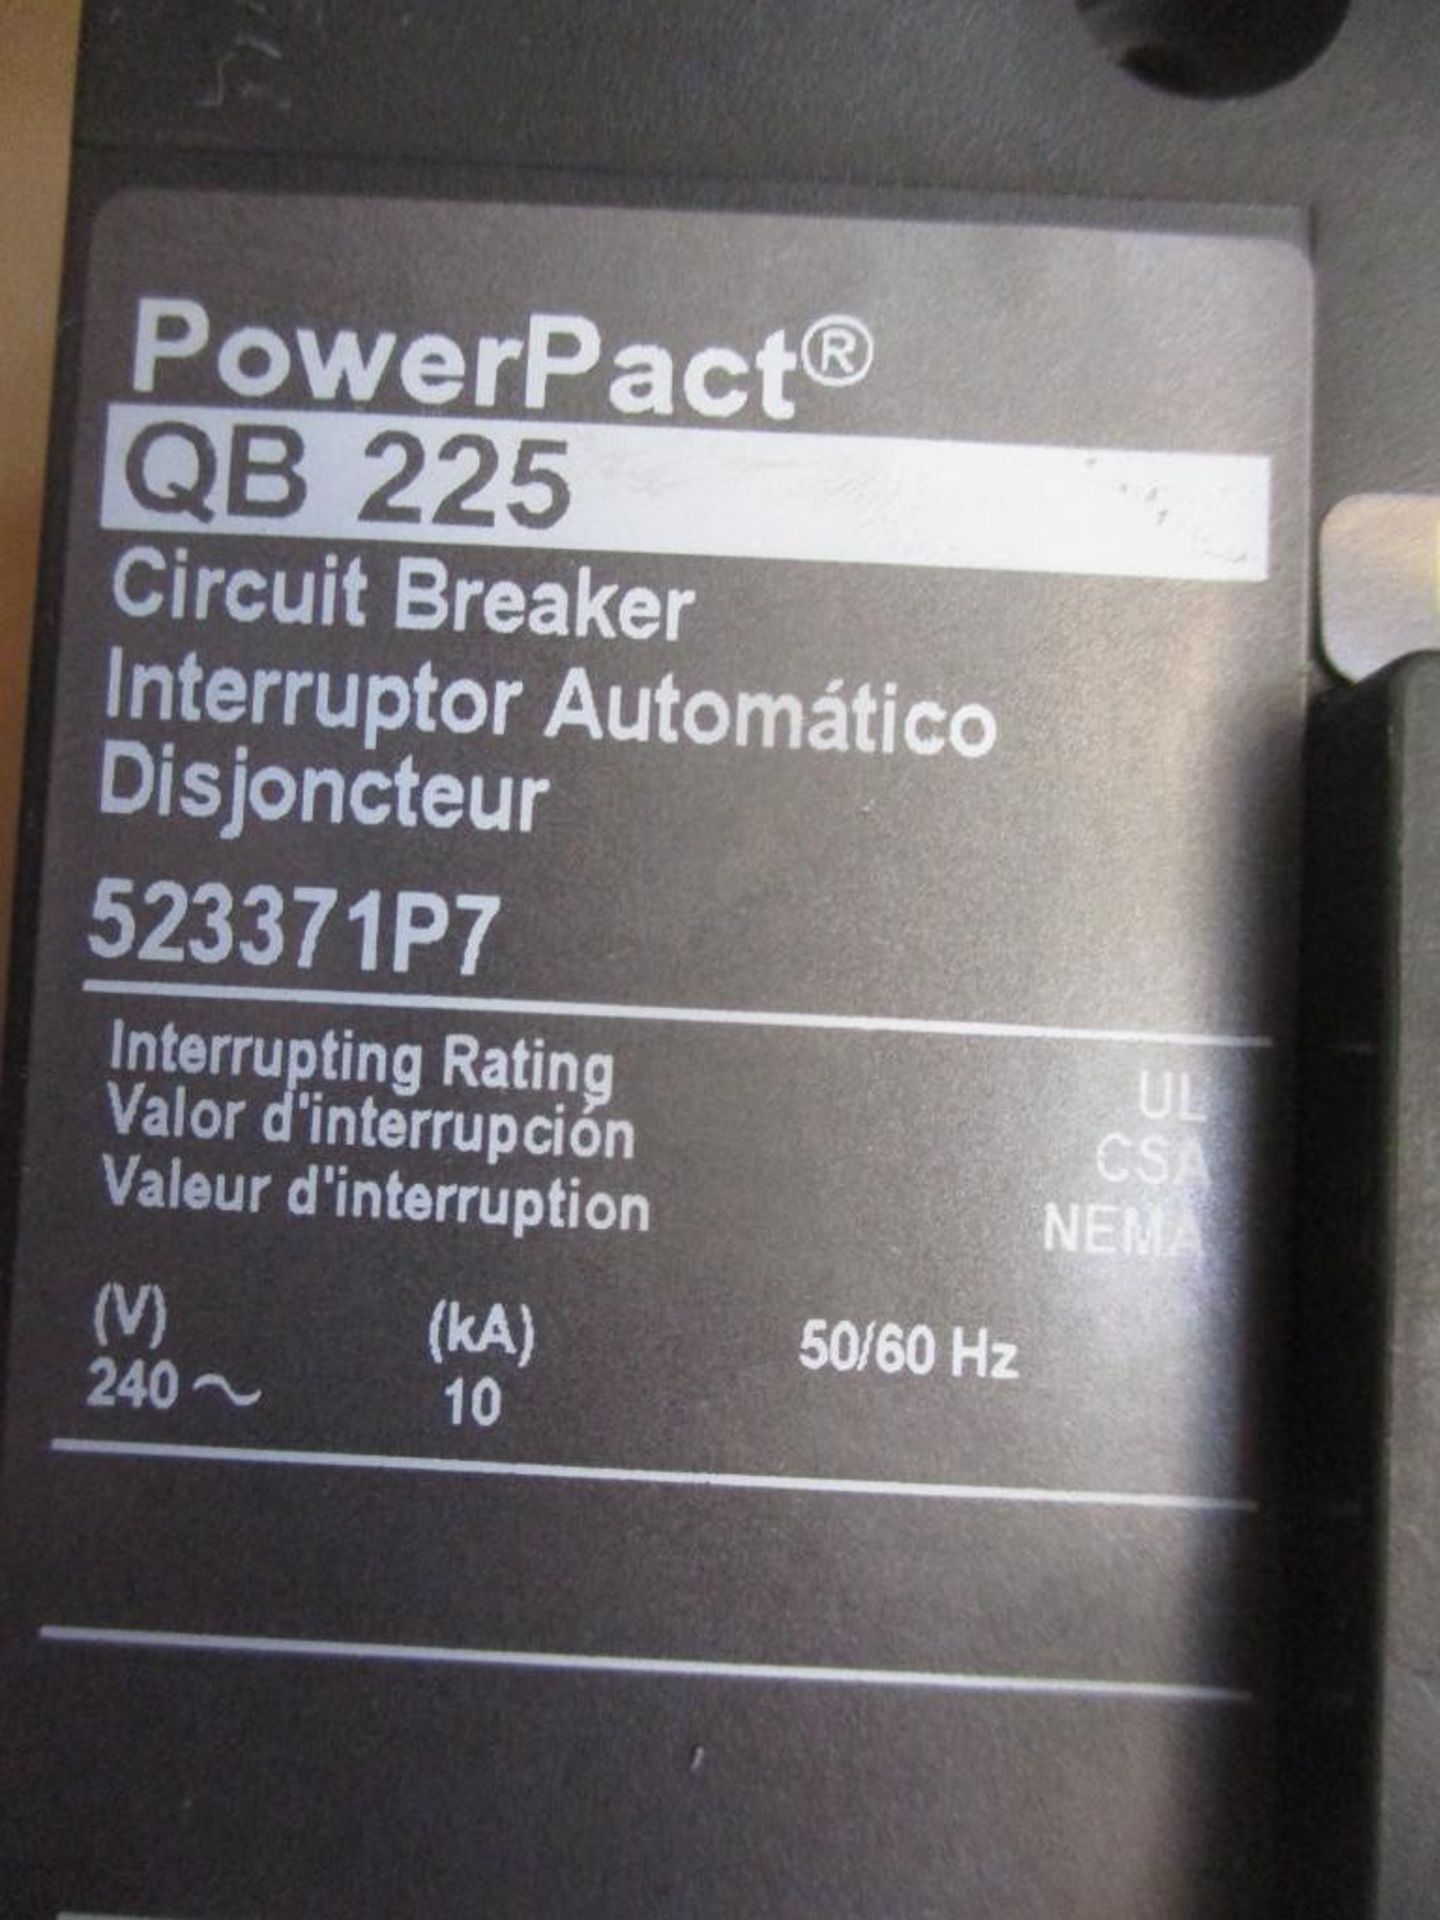 Square D 225 AMP Circuit Breaker, 523371P7, 225A, 3P, 240VAC, PowerPacT QB225 (New in Box) - Image 3 of 4